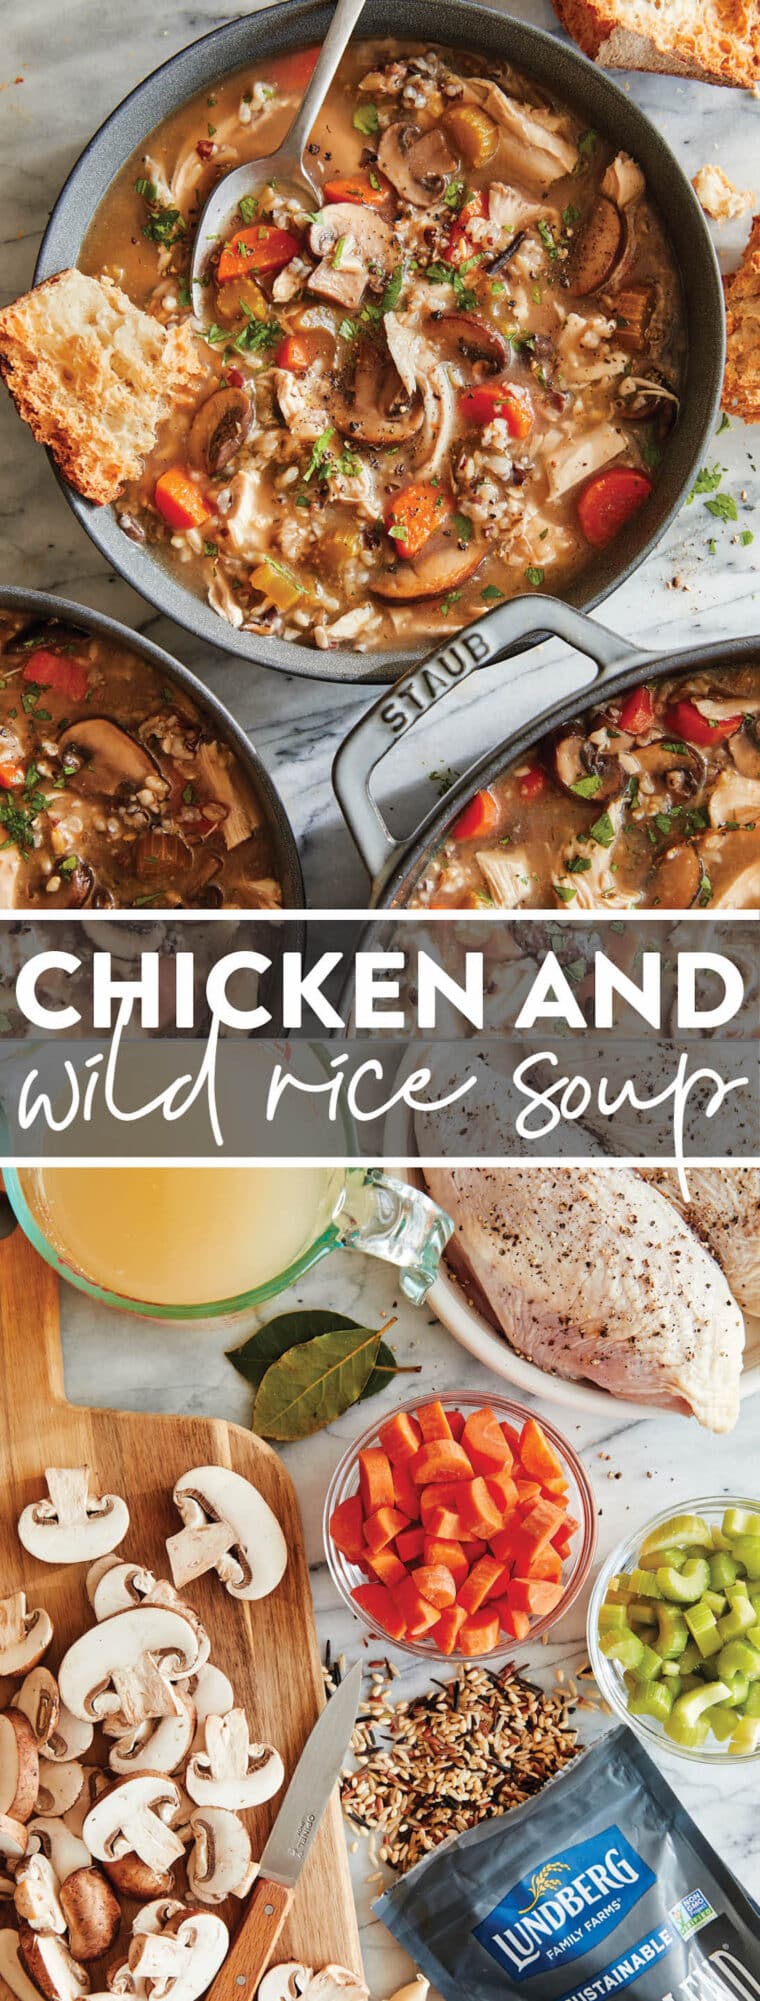 Chicken and Wild Rice Soup - So warm, so hearty, so cozy! With tender shredded chicken breasts, mushrooms, wild rice, and feel good veggies.